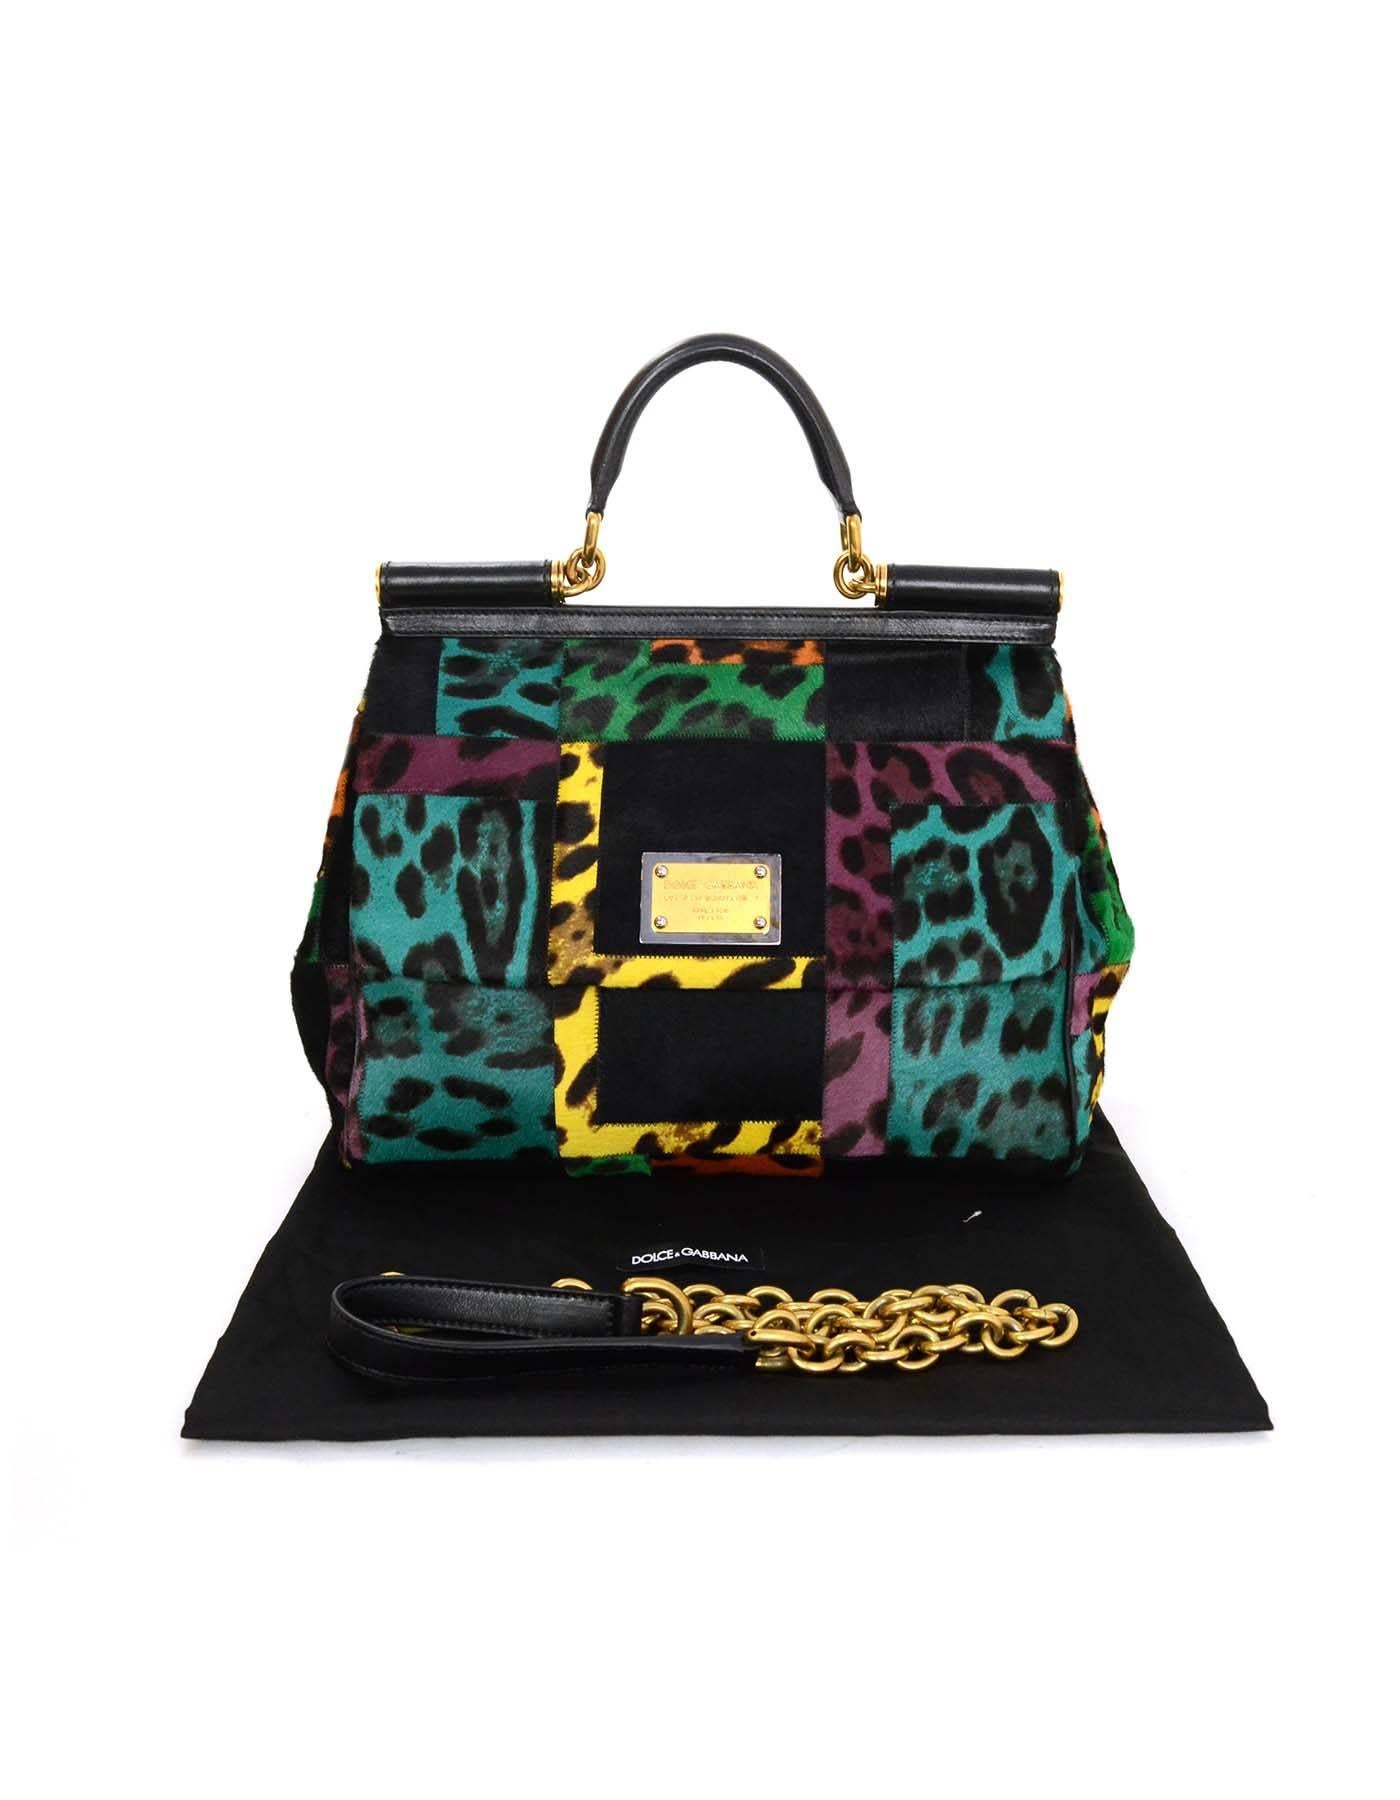 Dolce & Gabbana Sicily Leopard Print Pony-hair Patchwork Bag with Strap GHW 6